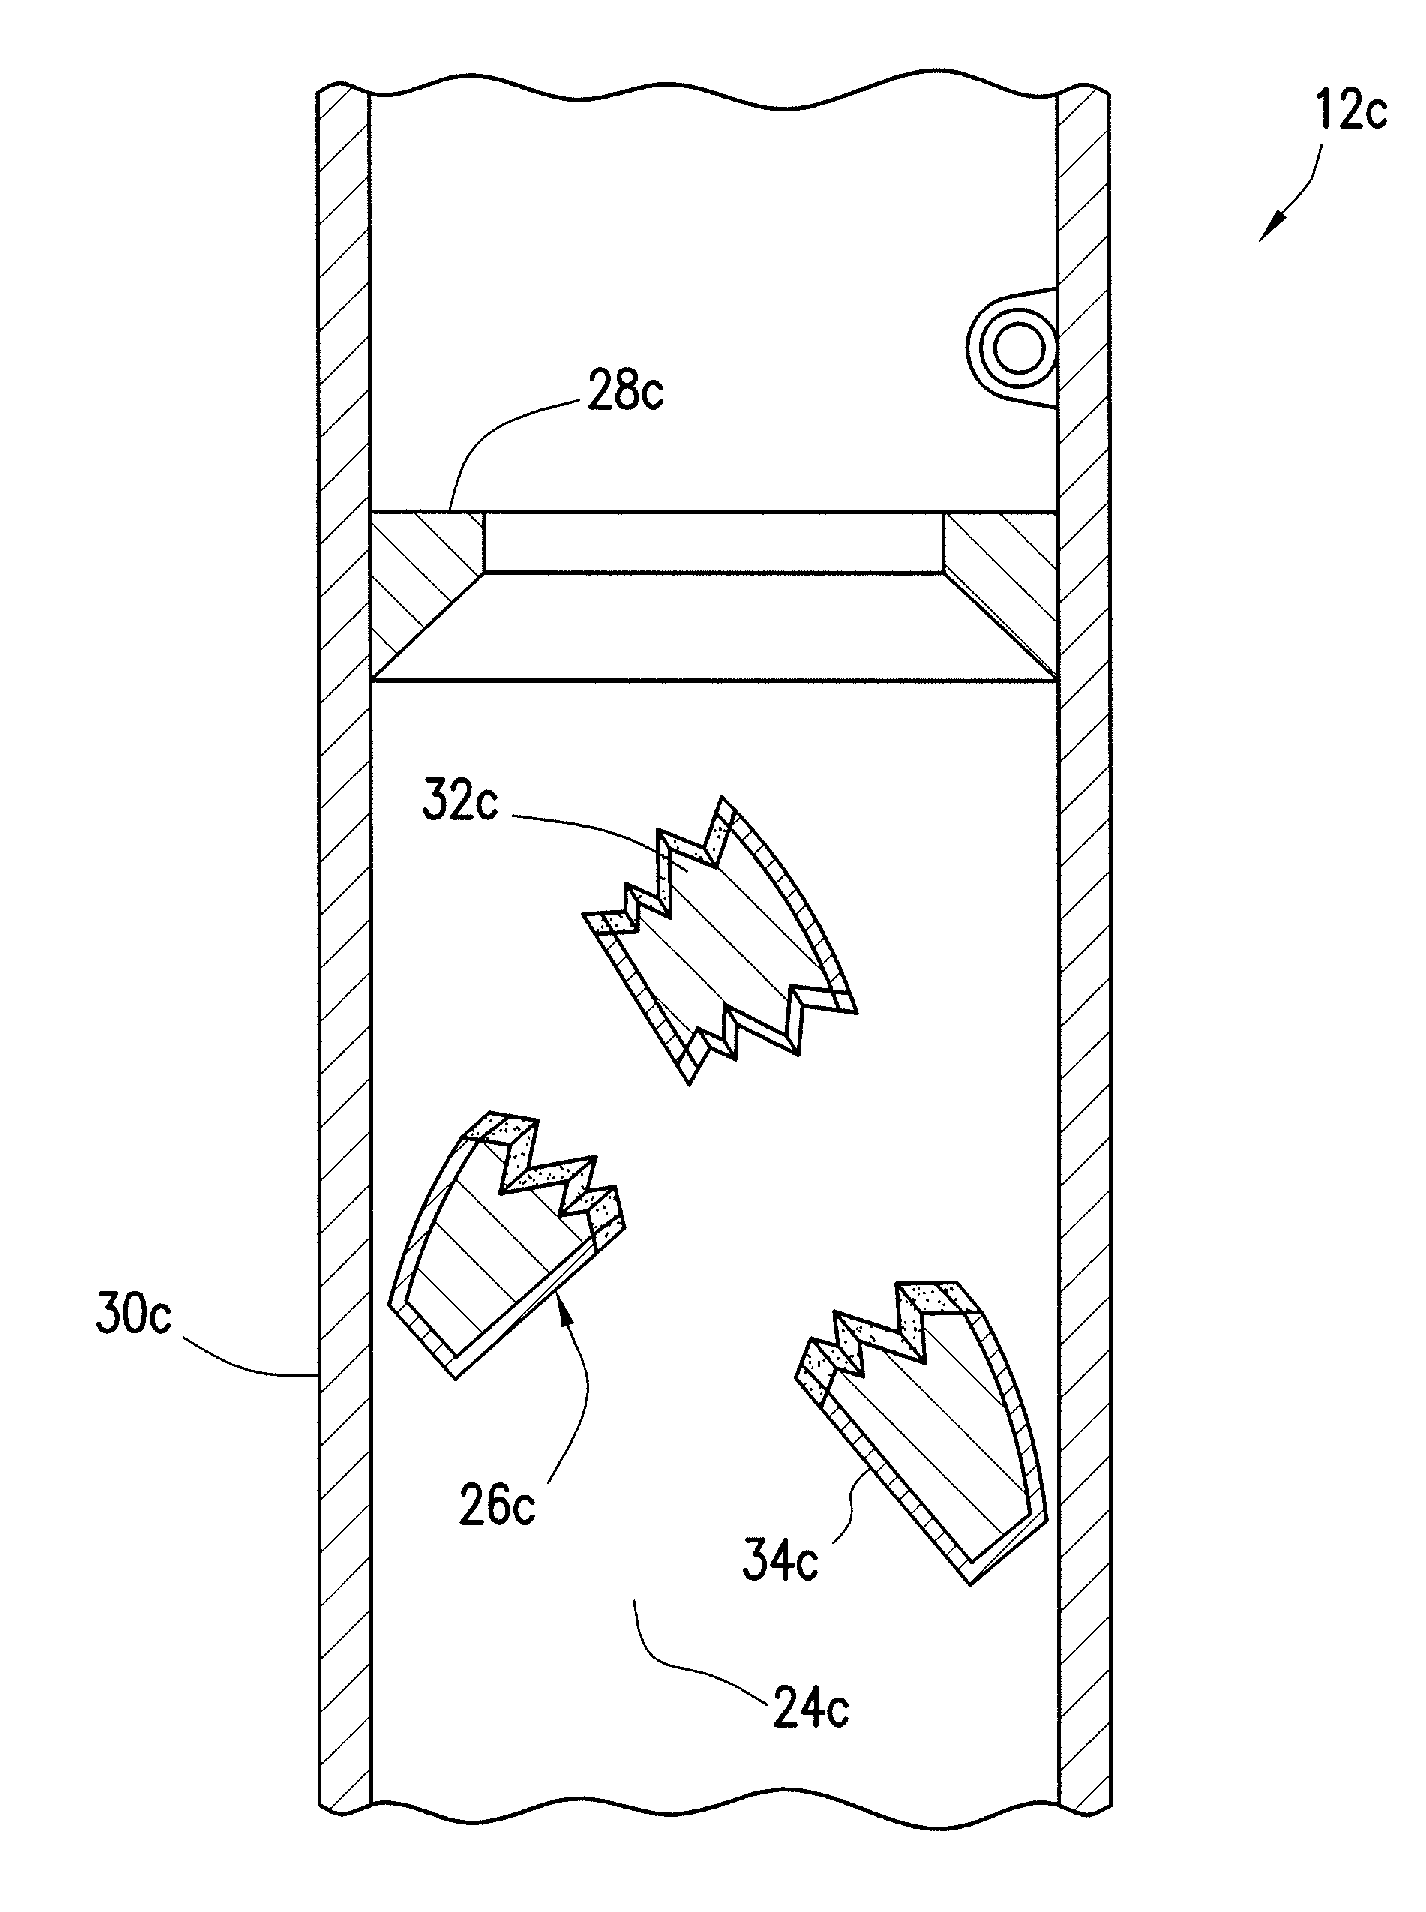 High strength dissolvable compositions for use in subterranean wells